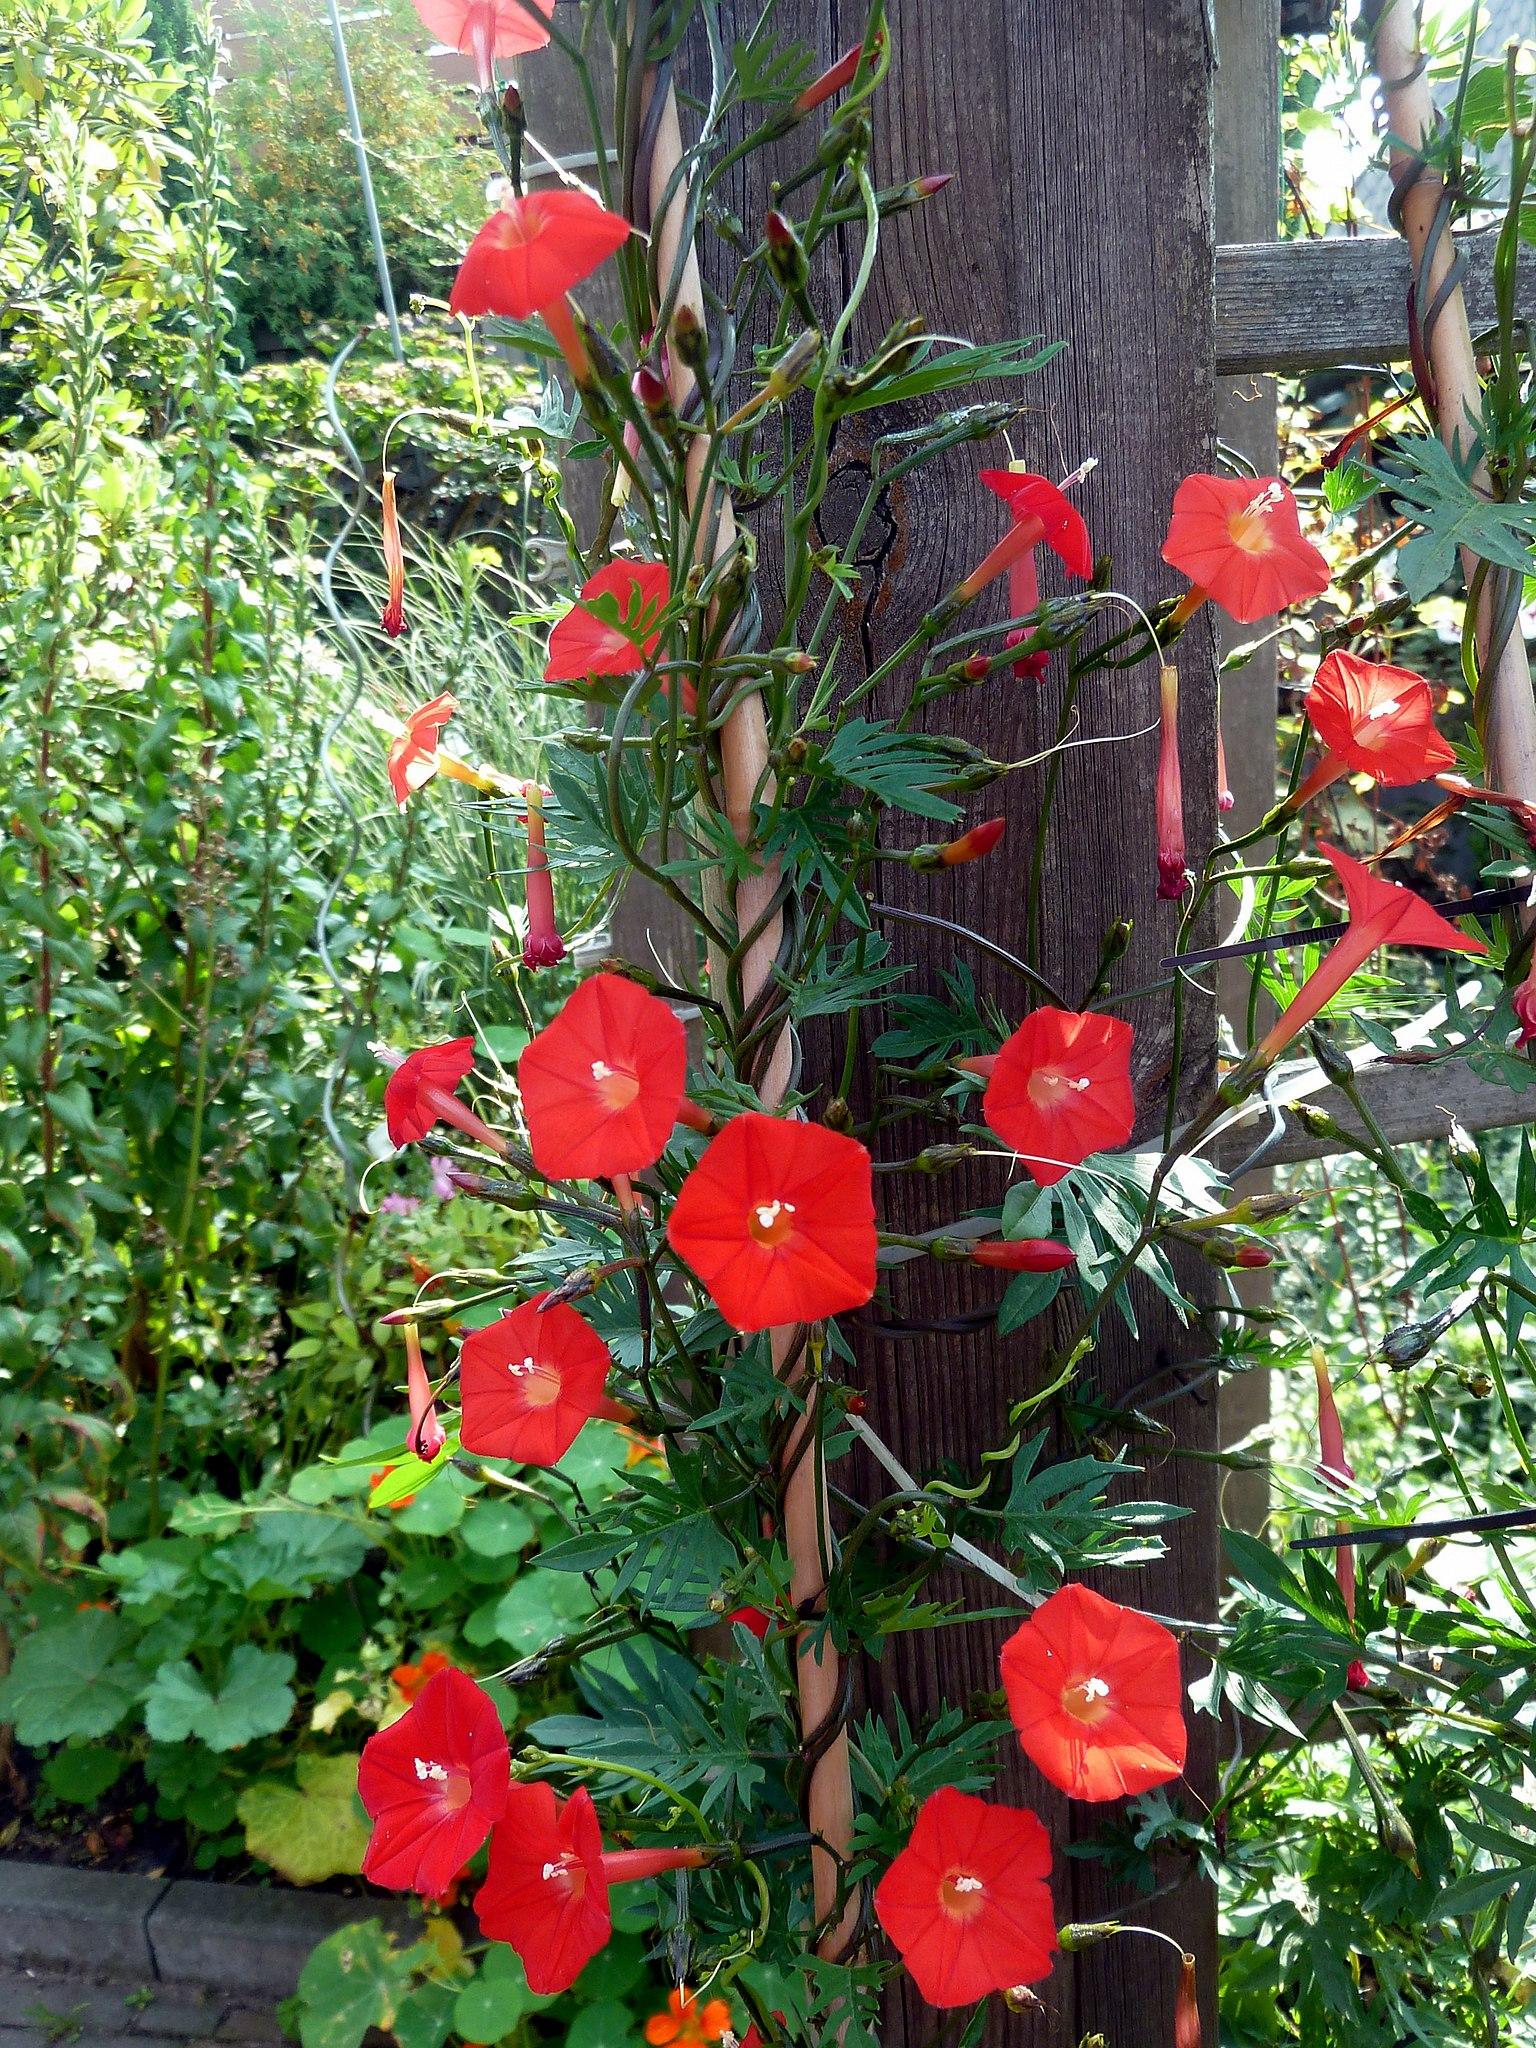 Red flower with  white stigma , white anthers, red filaments, red buds, dark-green petiole, dark-green stems and leaves.